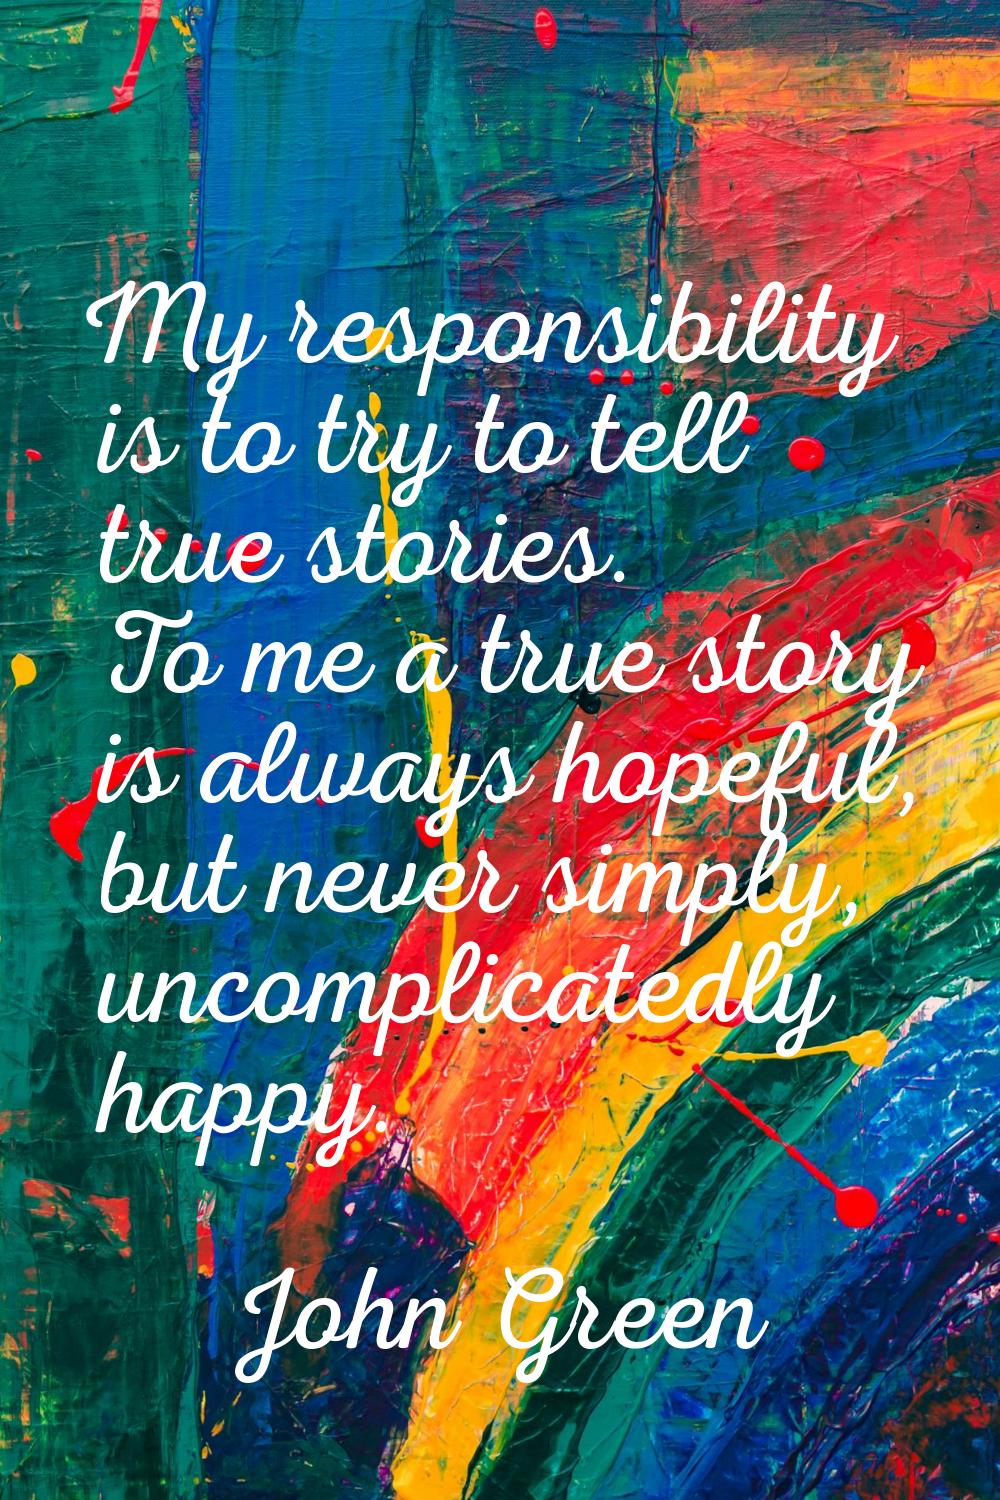 My responsibility is to try to tell true stories. To me a true story is always hopeful, but never s